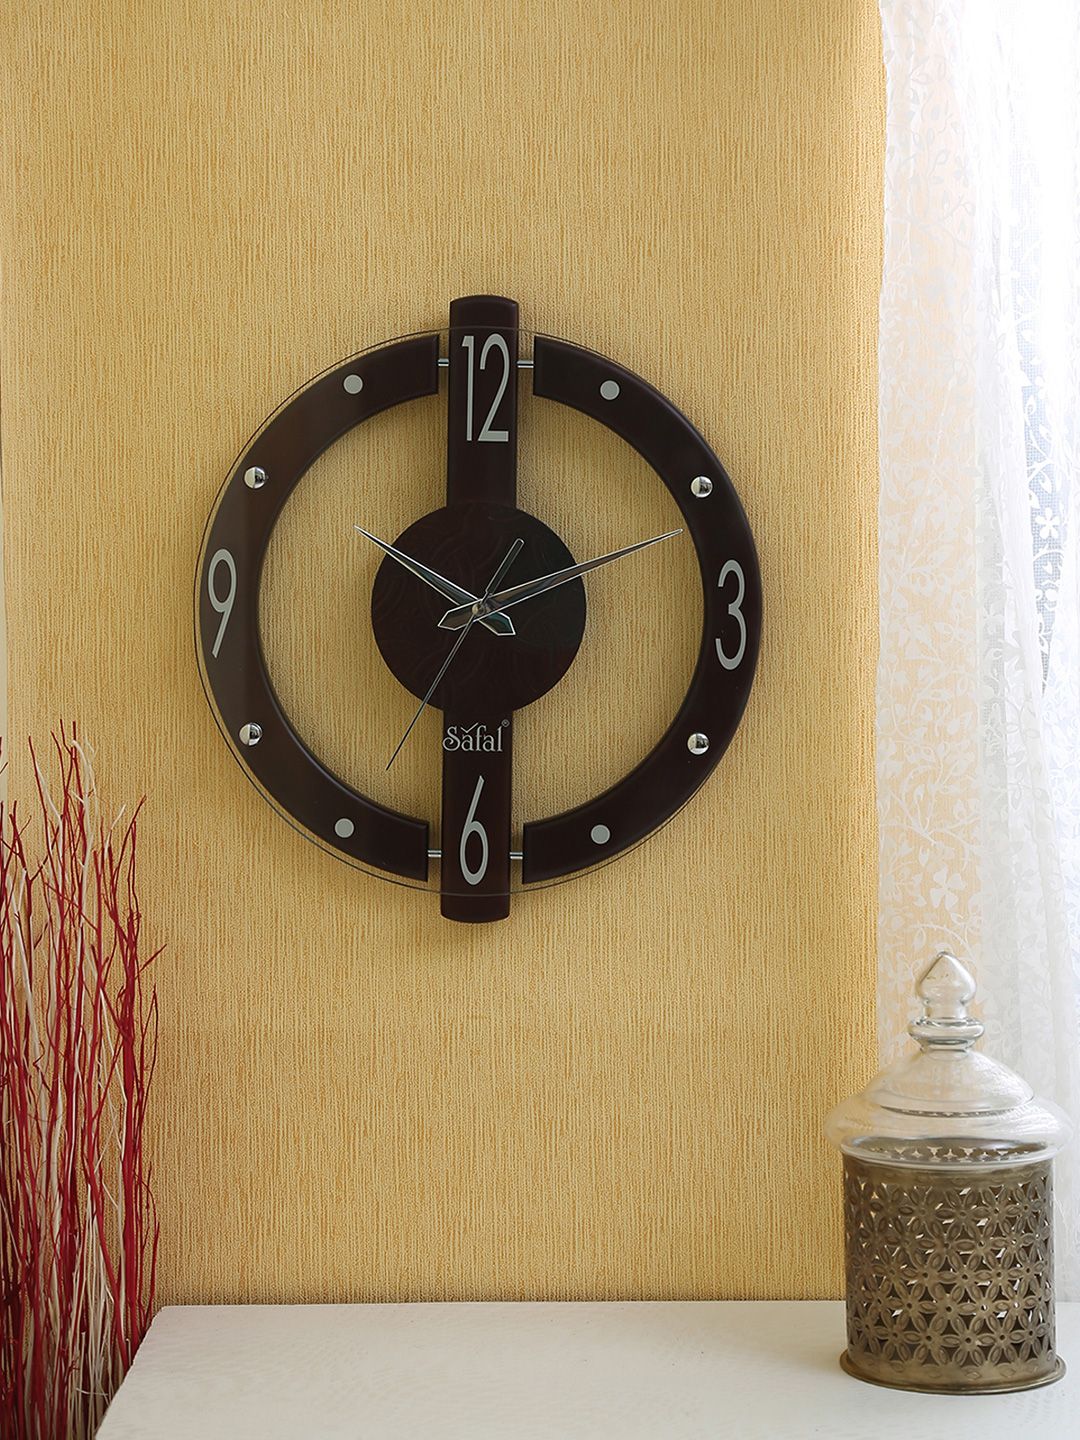 Safal Brown Dial Round Wooden Analogue Wall Clock Price in India